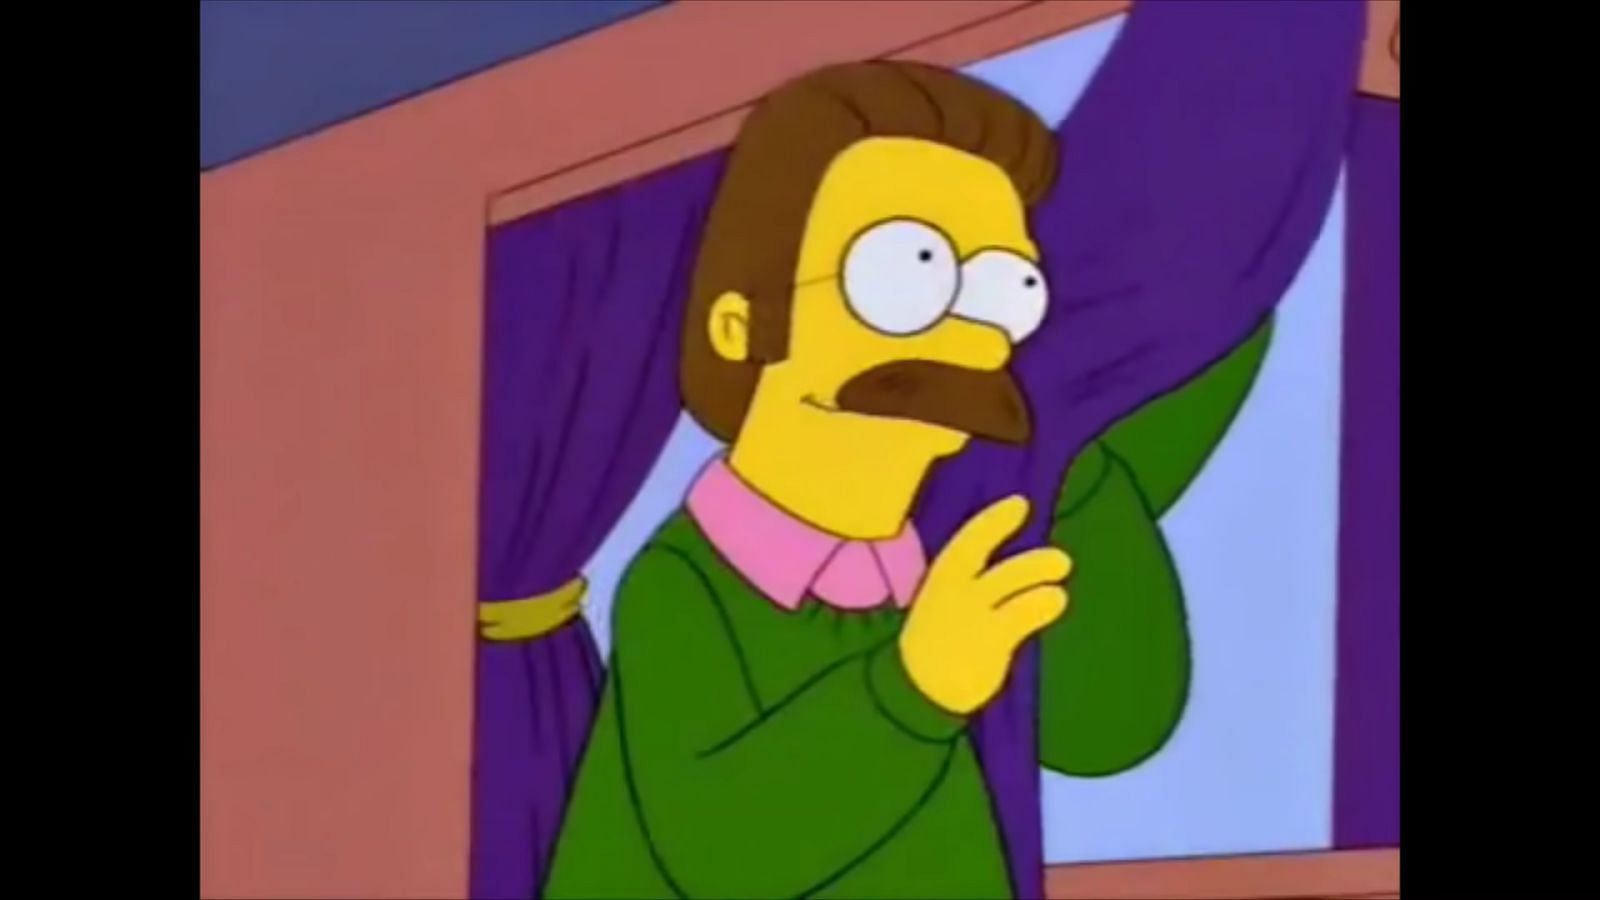 What are the traits of Flanders?